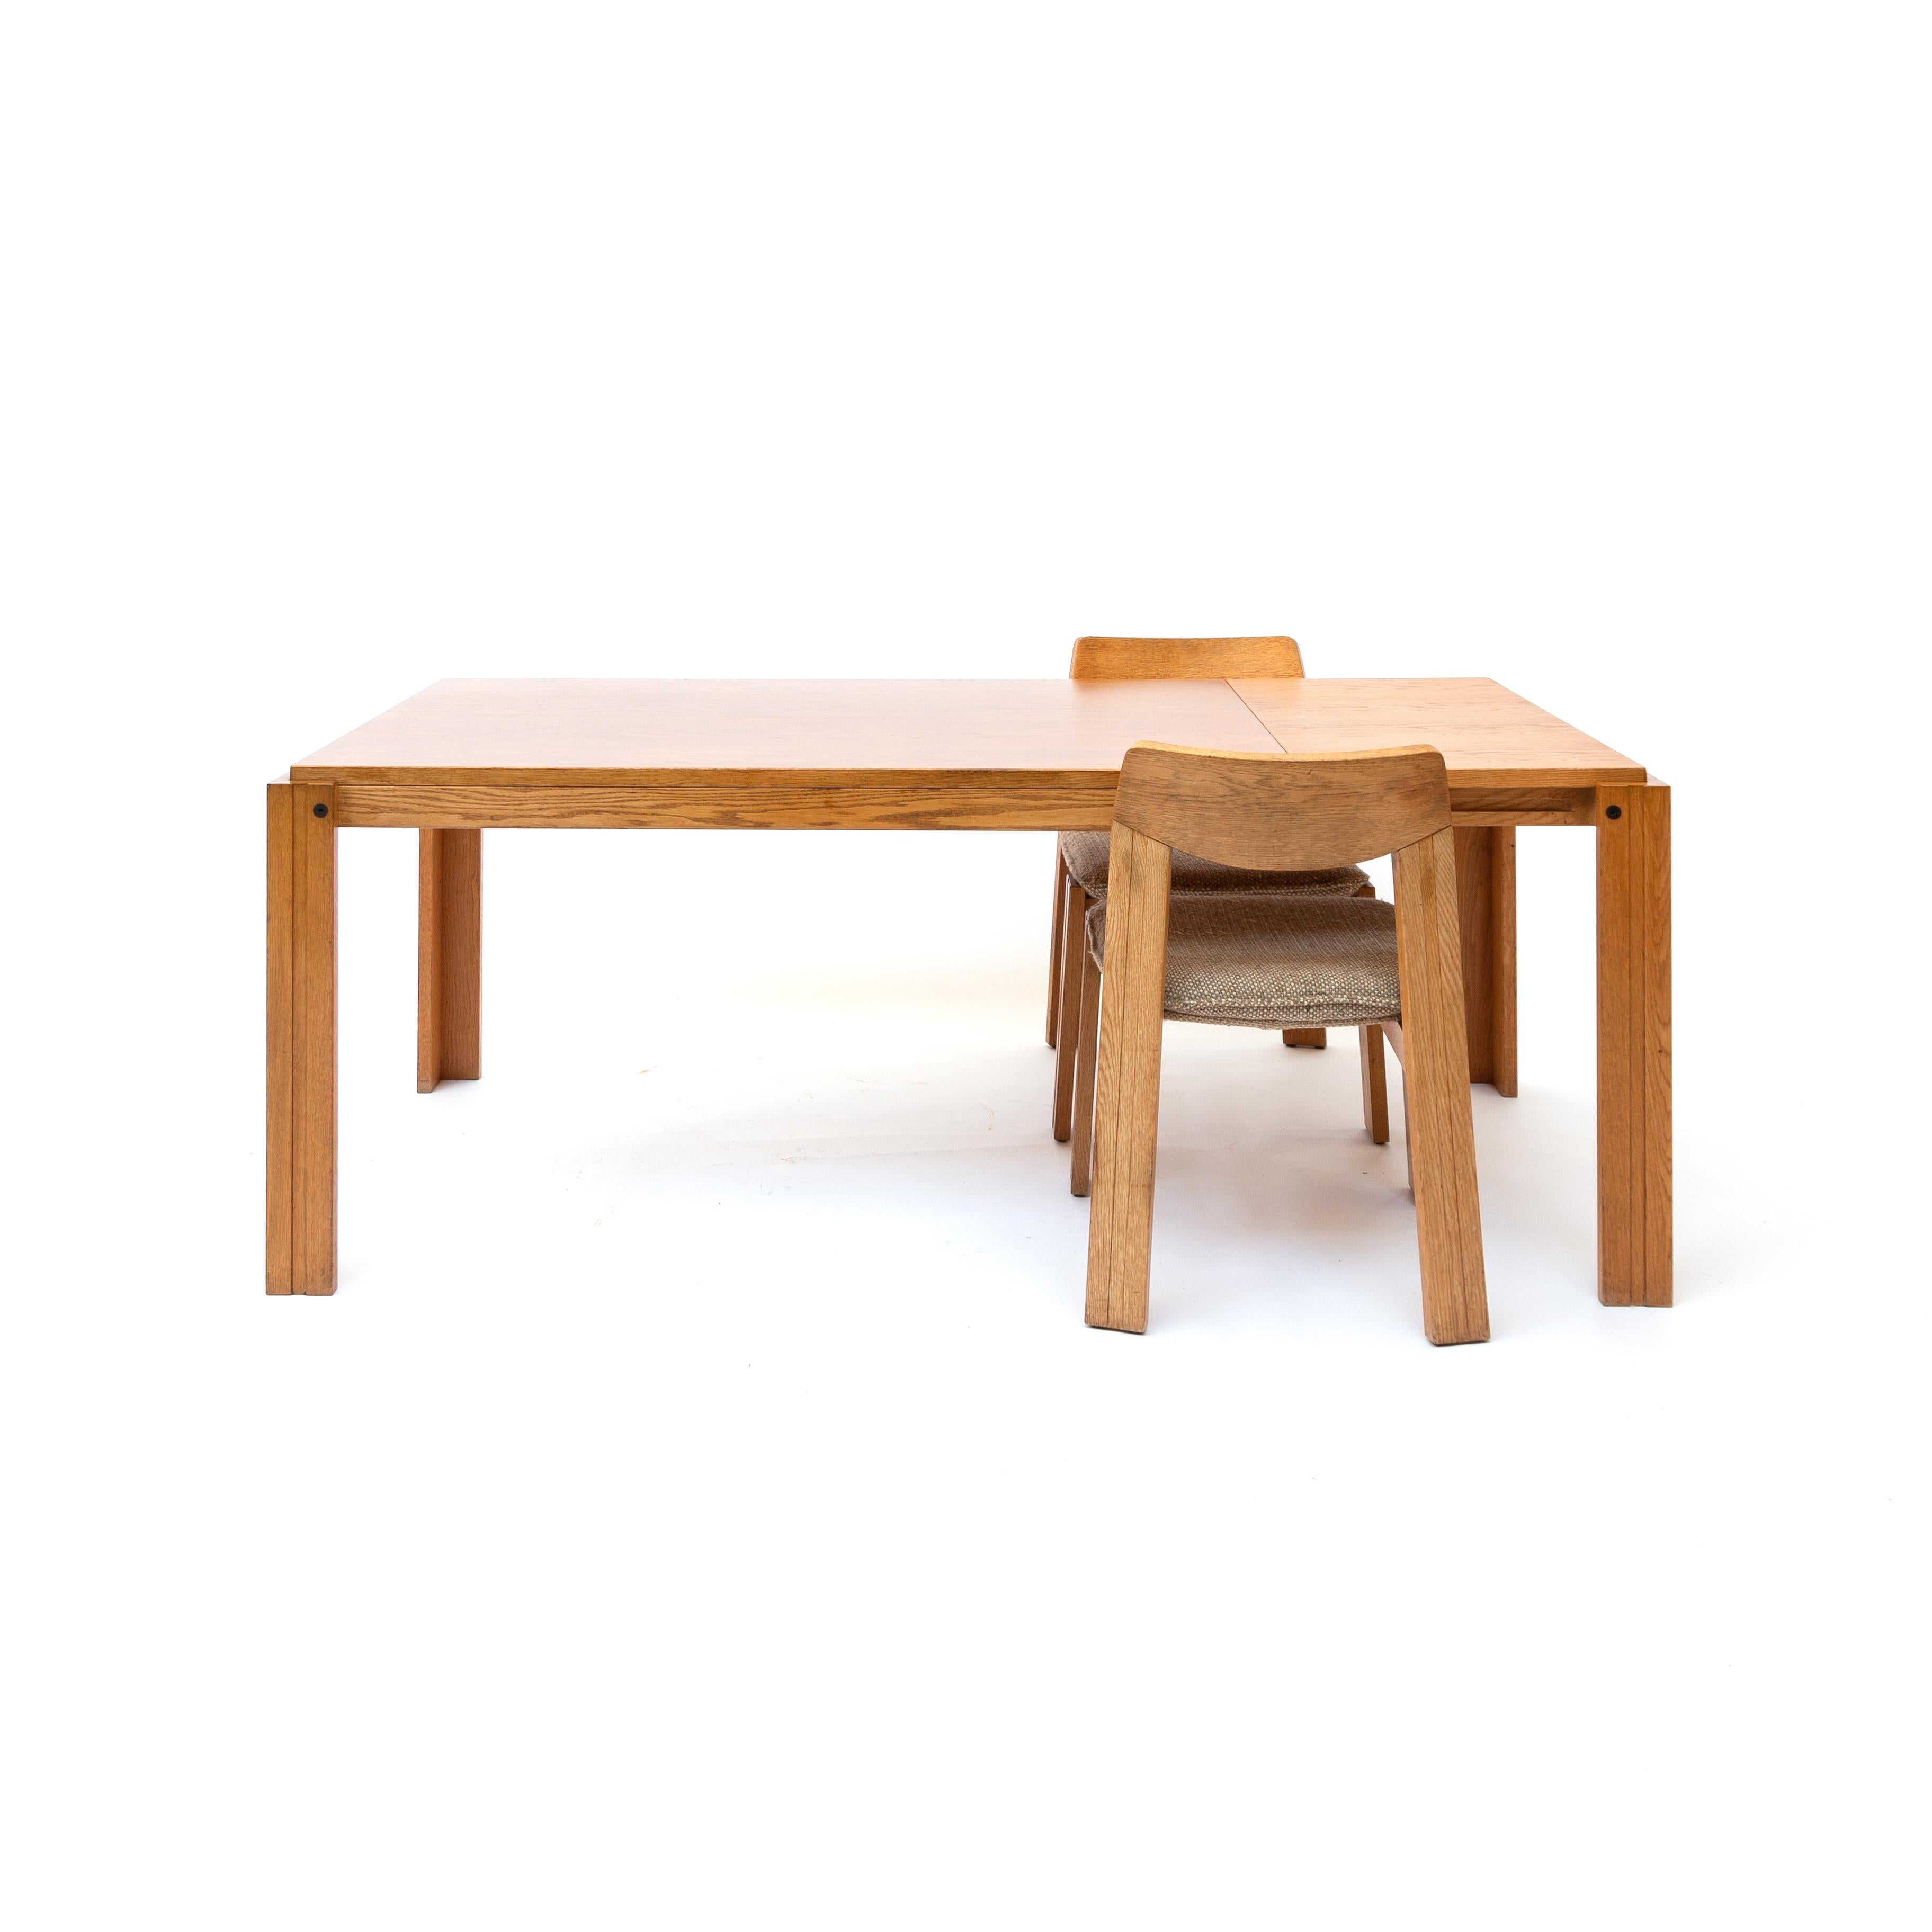 This Bluntly shaped oak dining table measures 184 x 90 cm in its standard shape. Its phenomenal sliding construction enables to add a 50 cm extra tableau. The thableau can invisible be stored underneath the fixed tabletop. The construction shown is